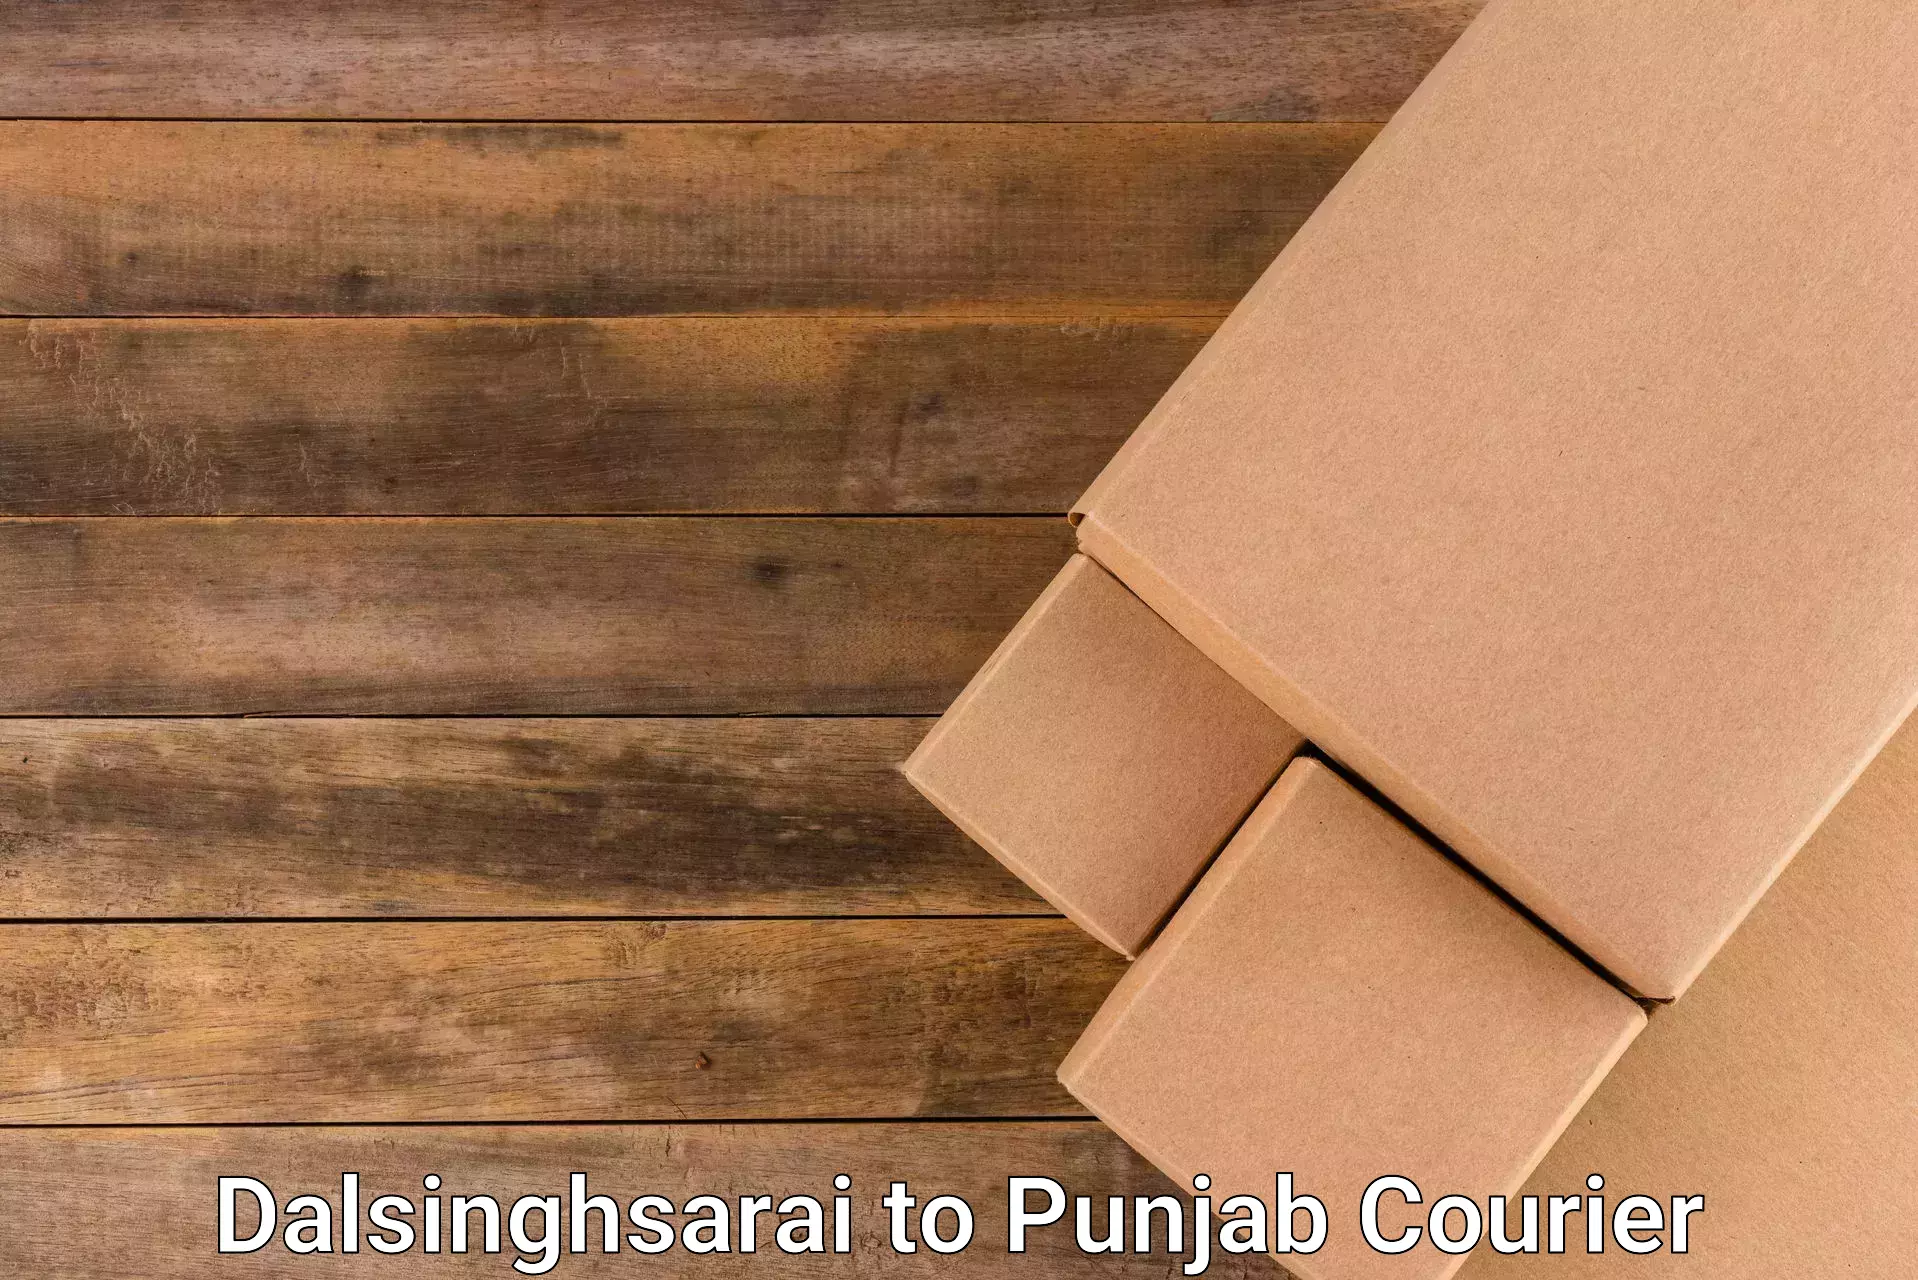 Same-day delivery solutions Dalsinghsarai to Raikot